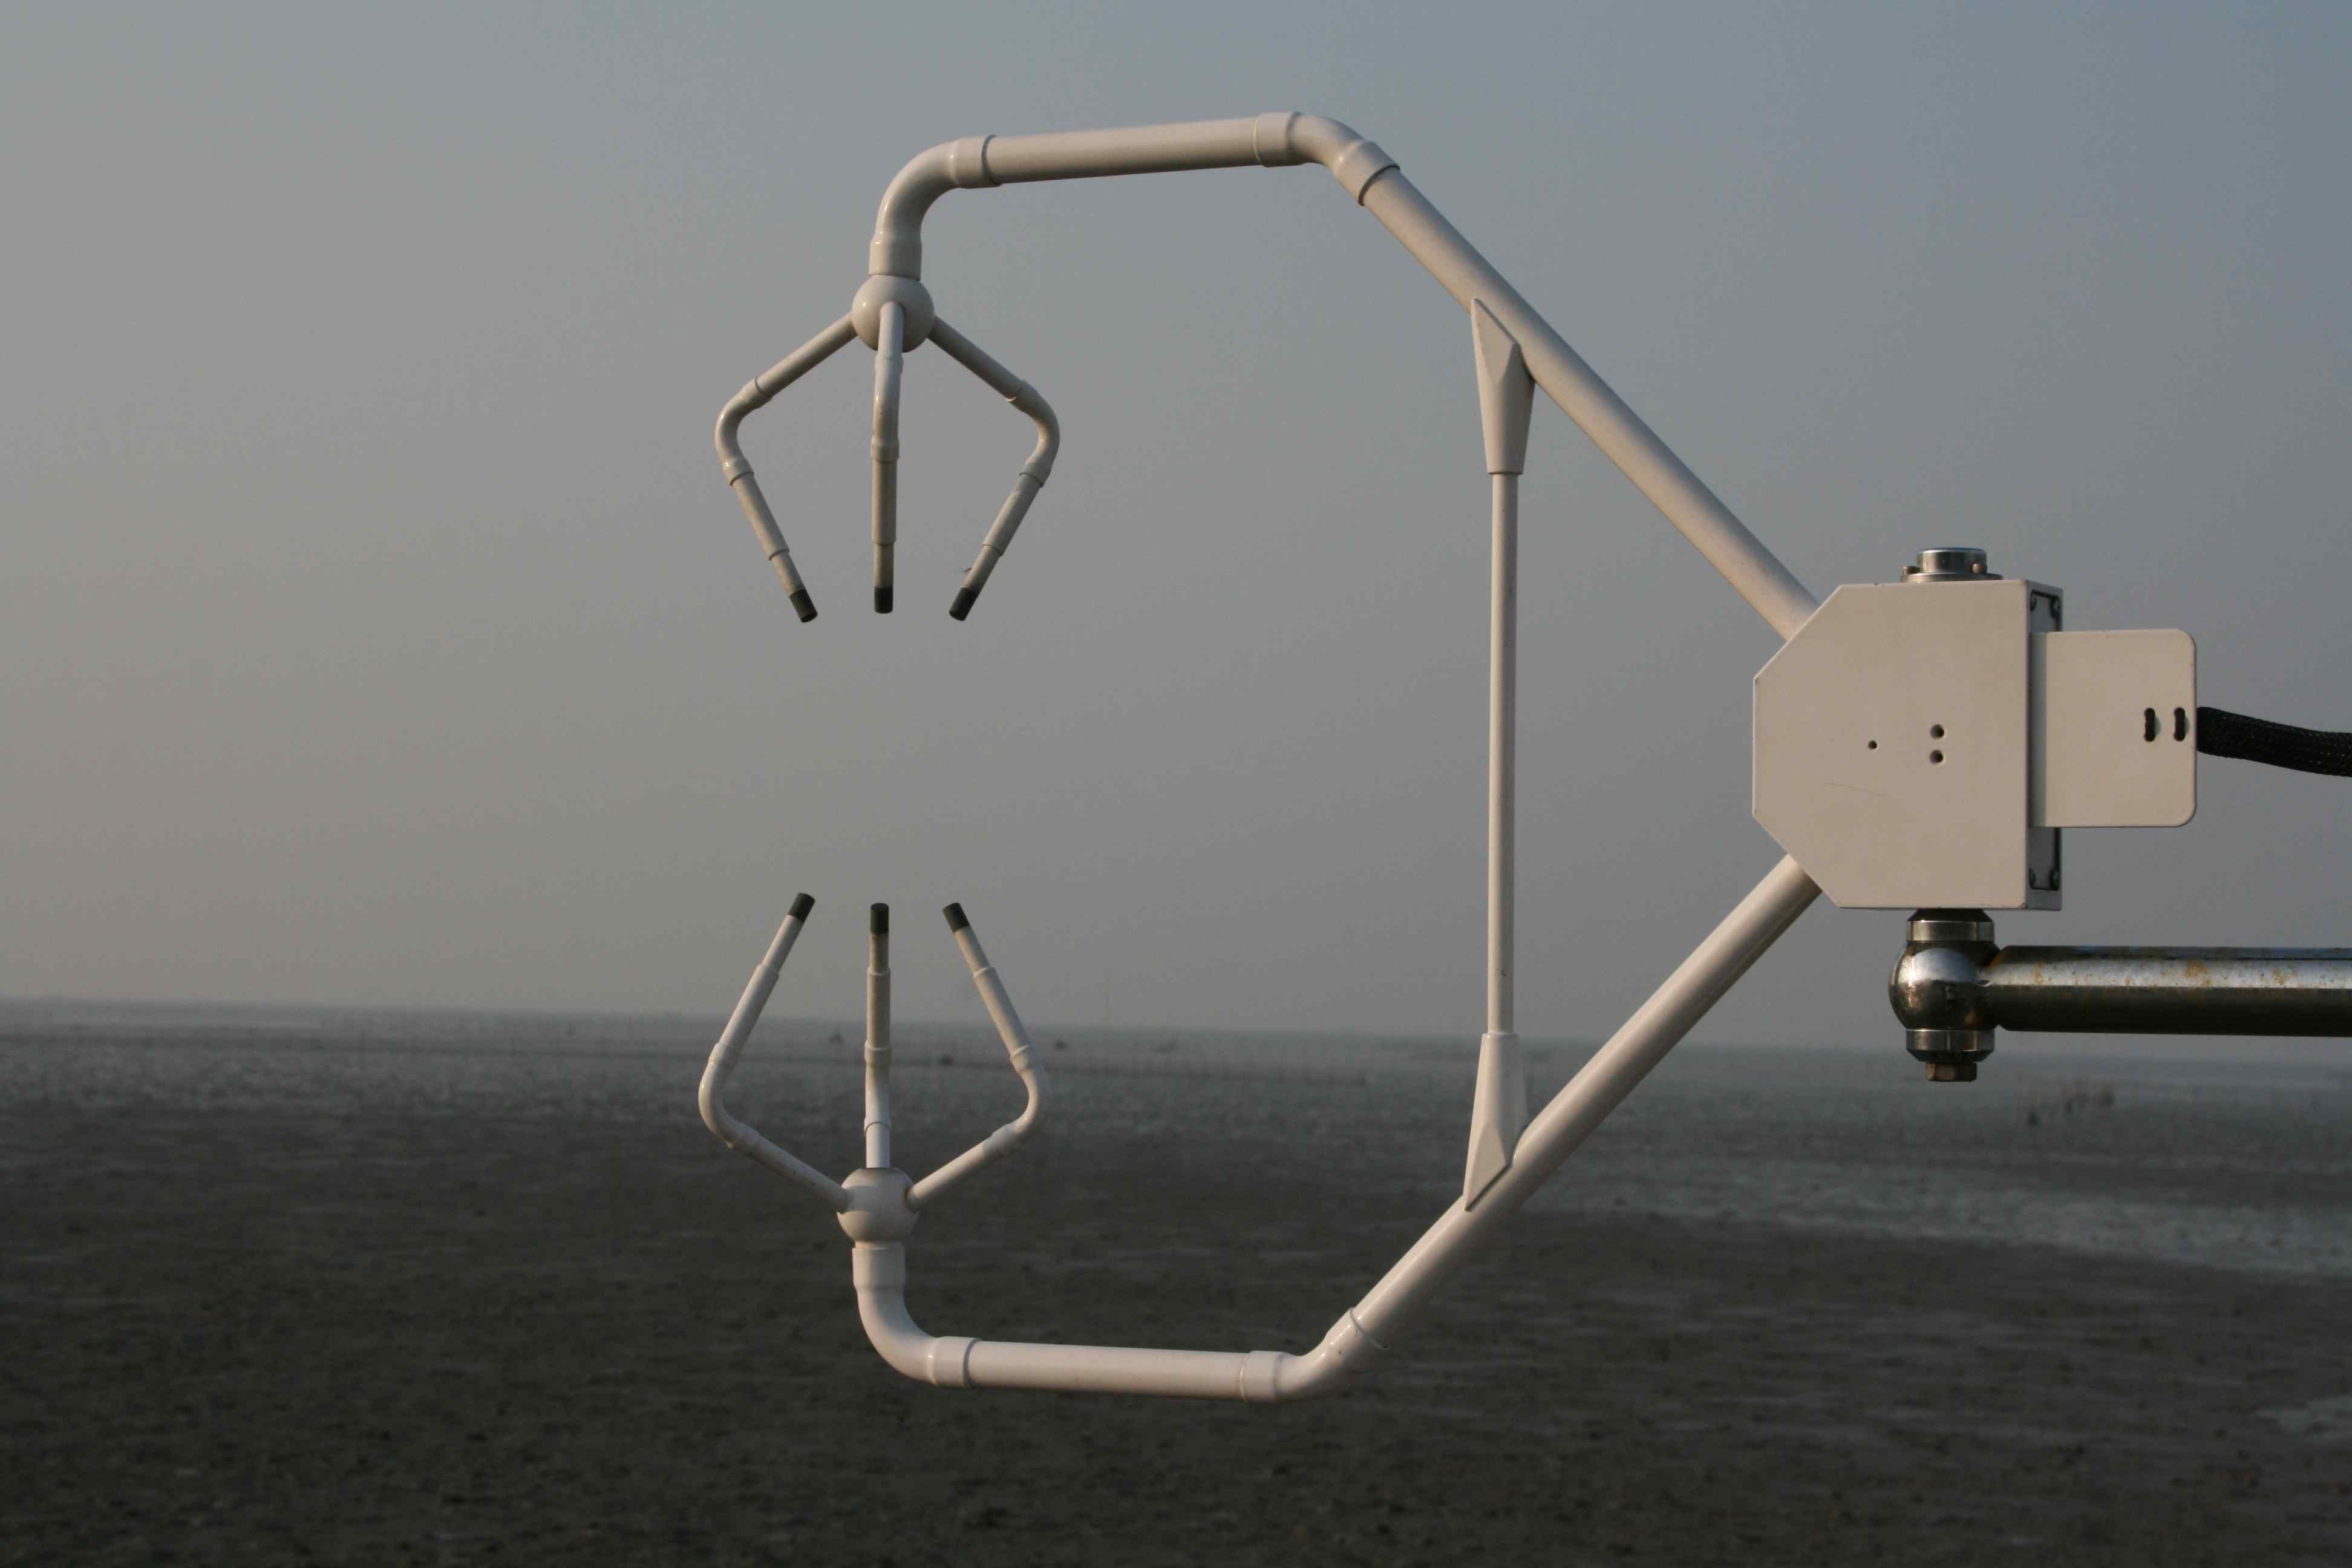 Fig. 4. Three-dimensional ultrasonic anemometer (CSAT3) that measures momentum flux, sensible heat flux, air temperature, wind direction, and wind speed.